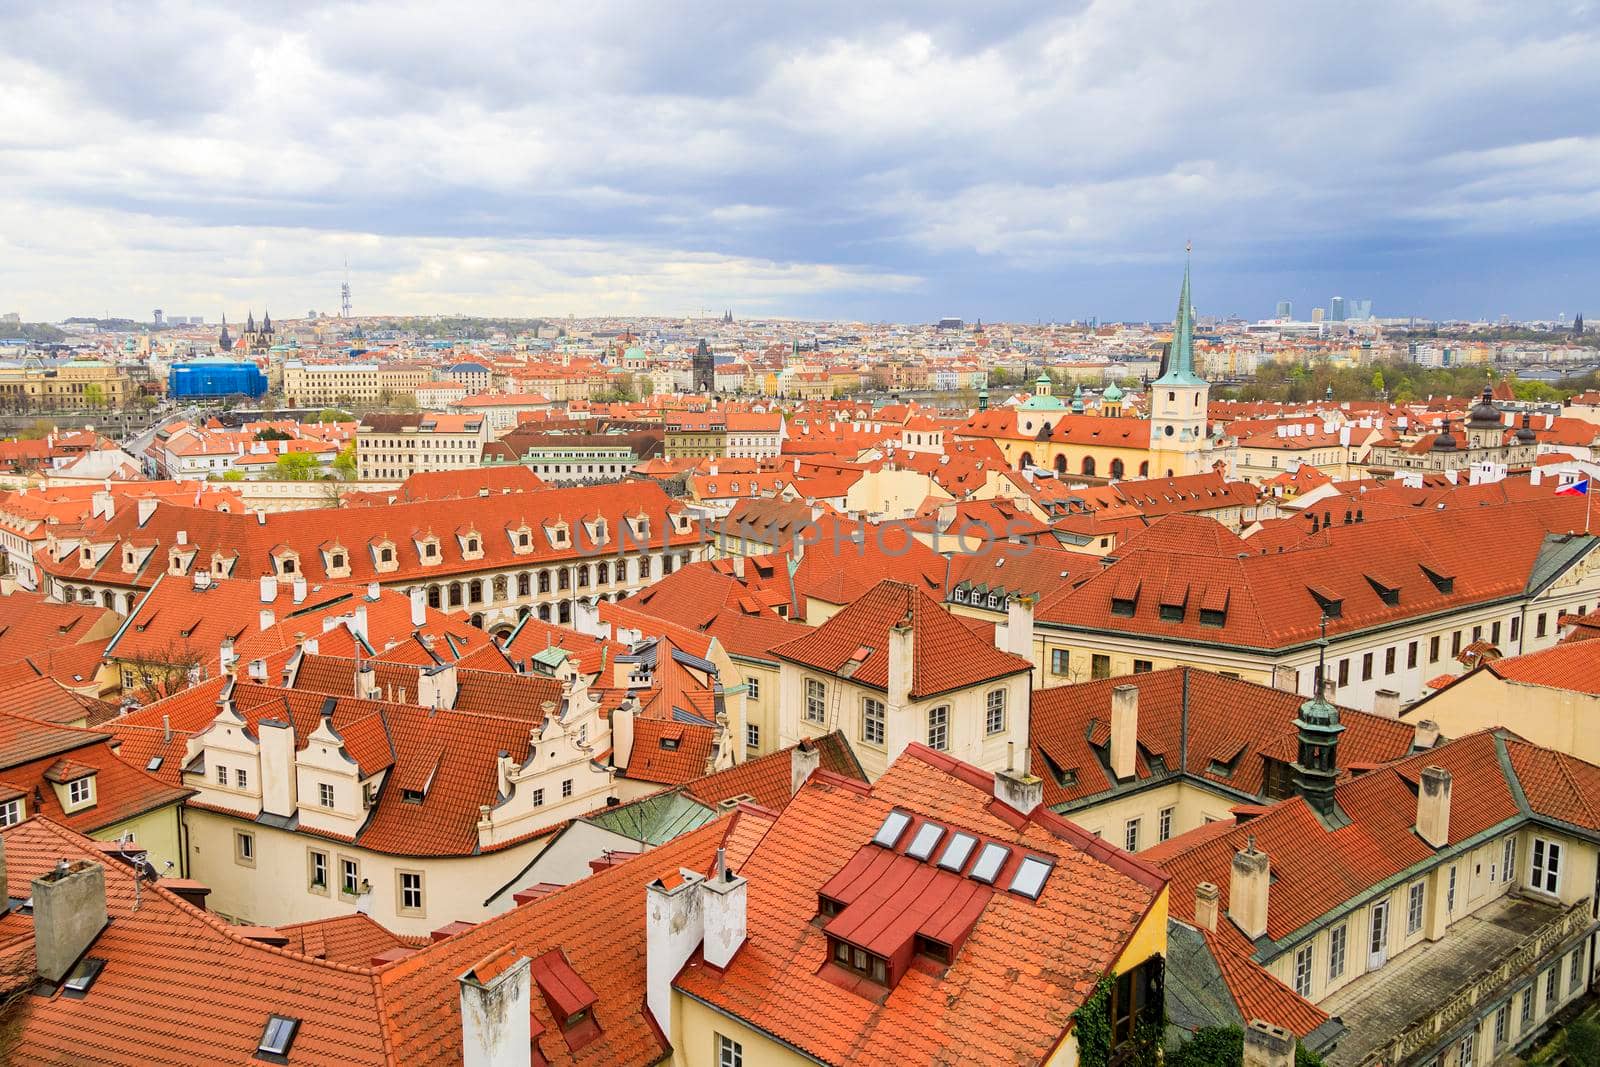 Red-brown roofs of beautiful cities made of natural tiles. The view from the top. in the distance, the horizon of the blue sky.